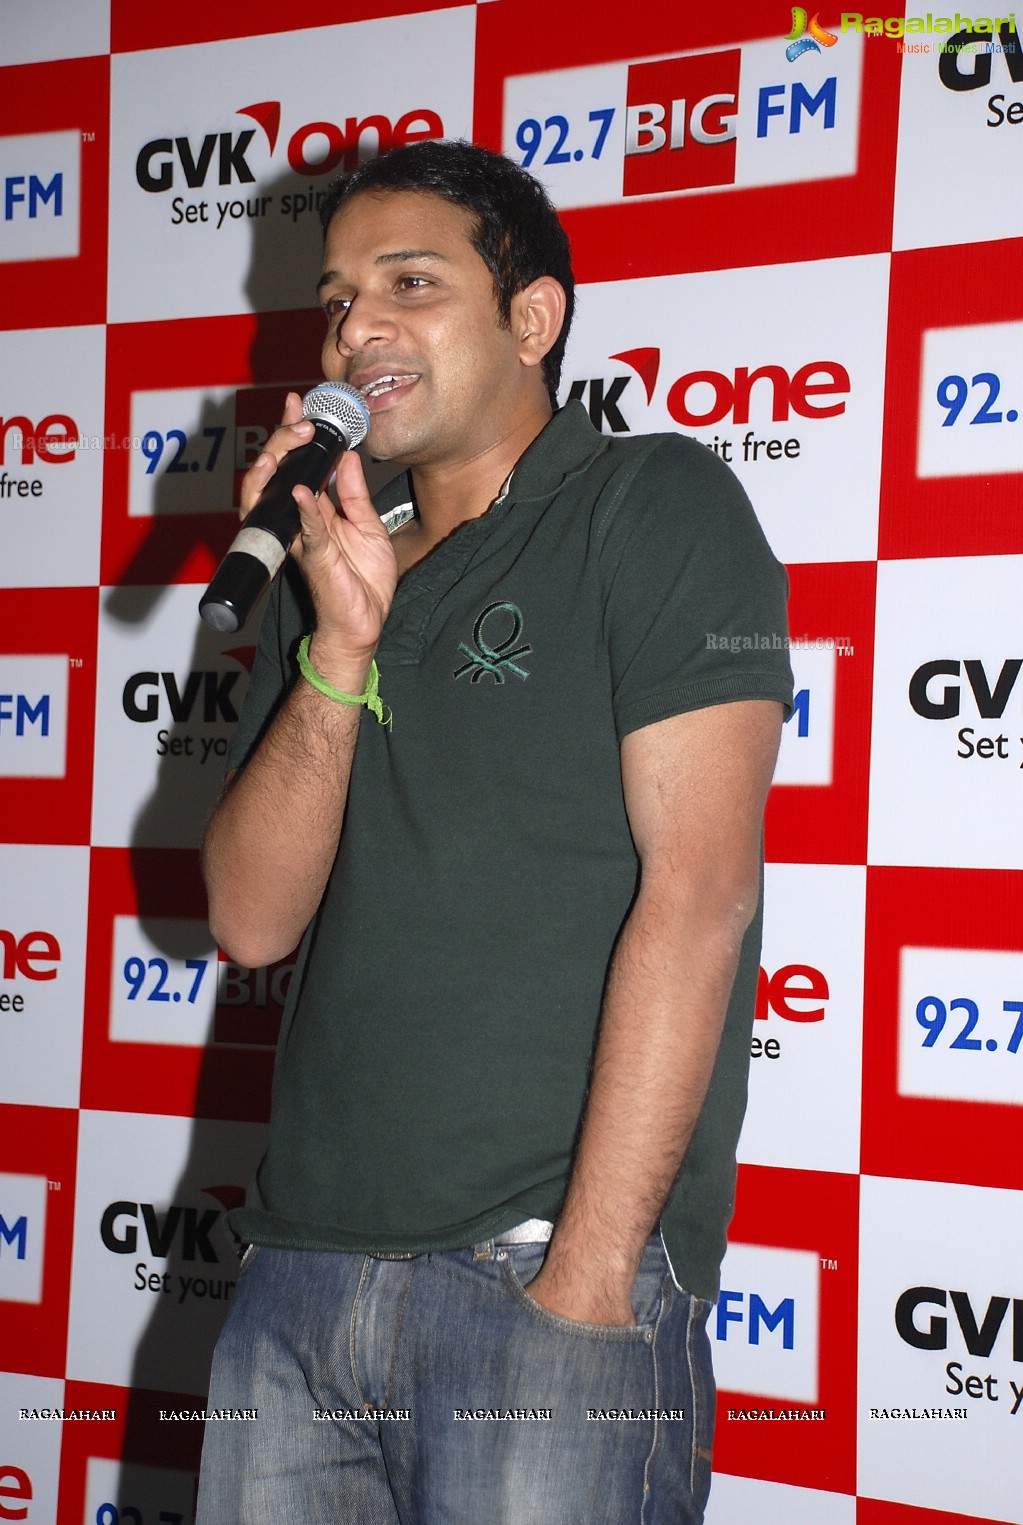 Sing with Karthik at GVK One Mall, Hyd